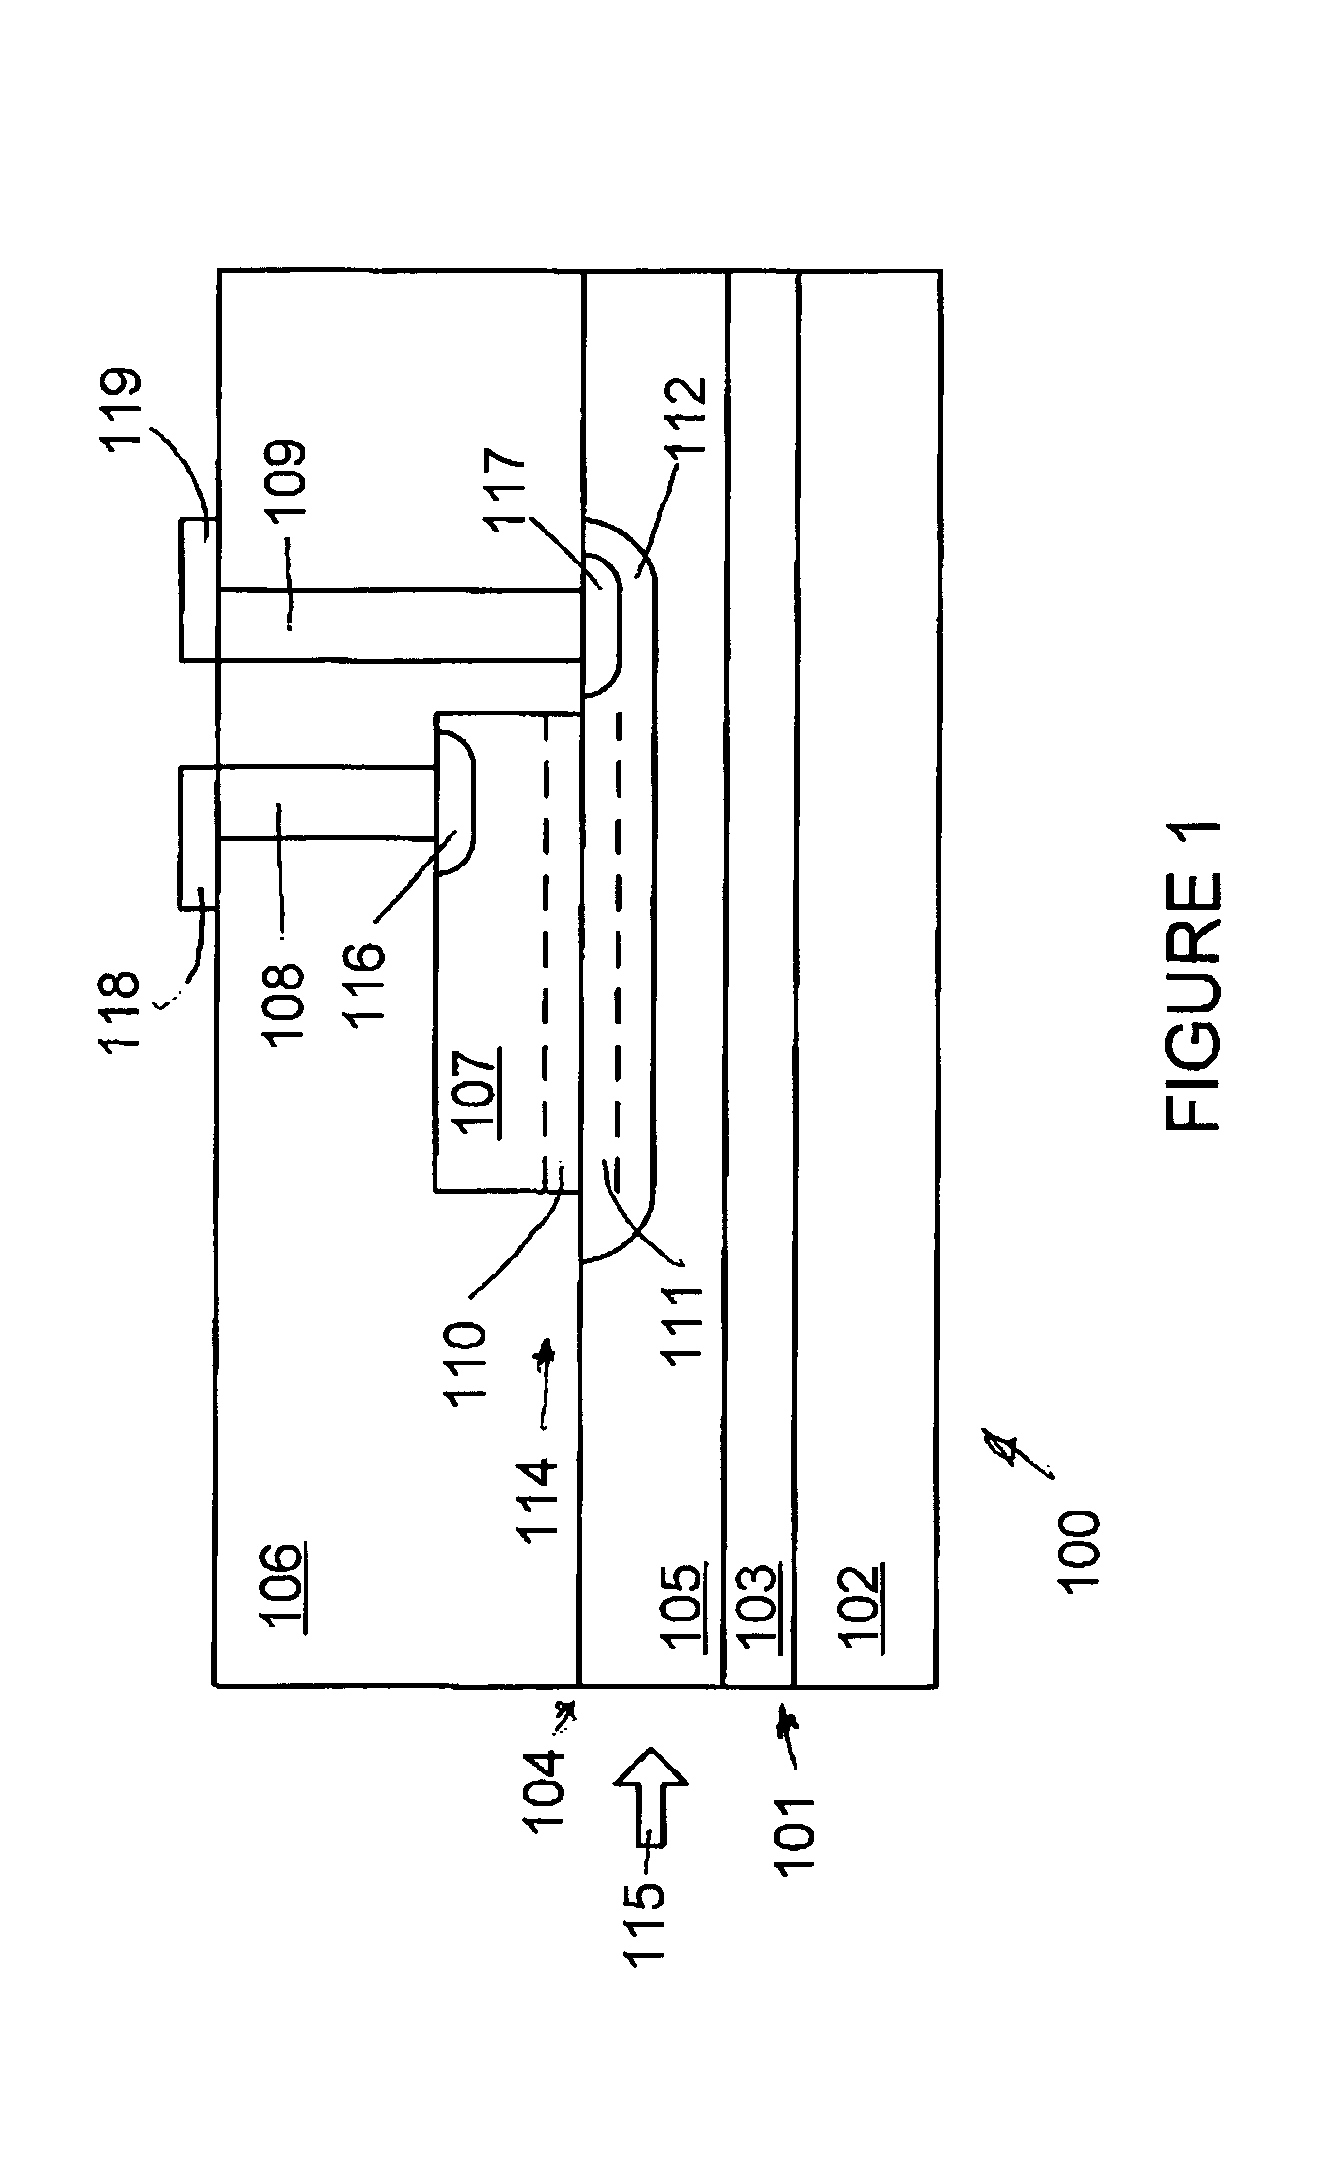 Waveguide photodetector with integrated electronics